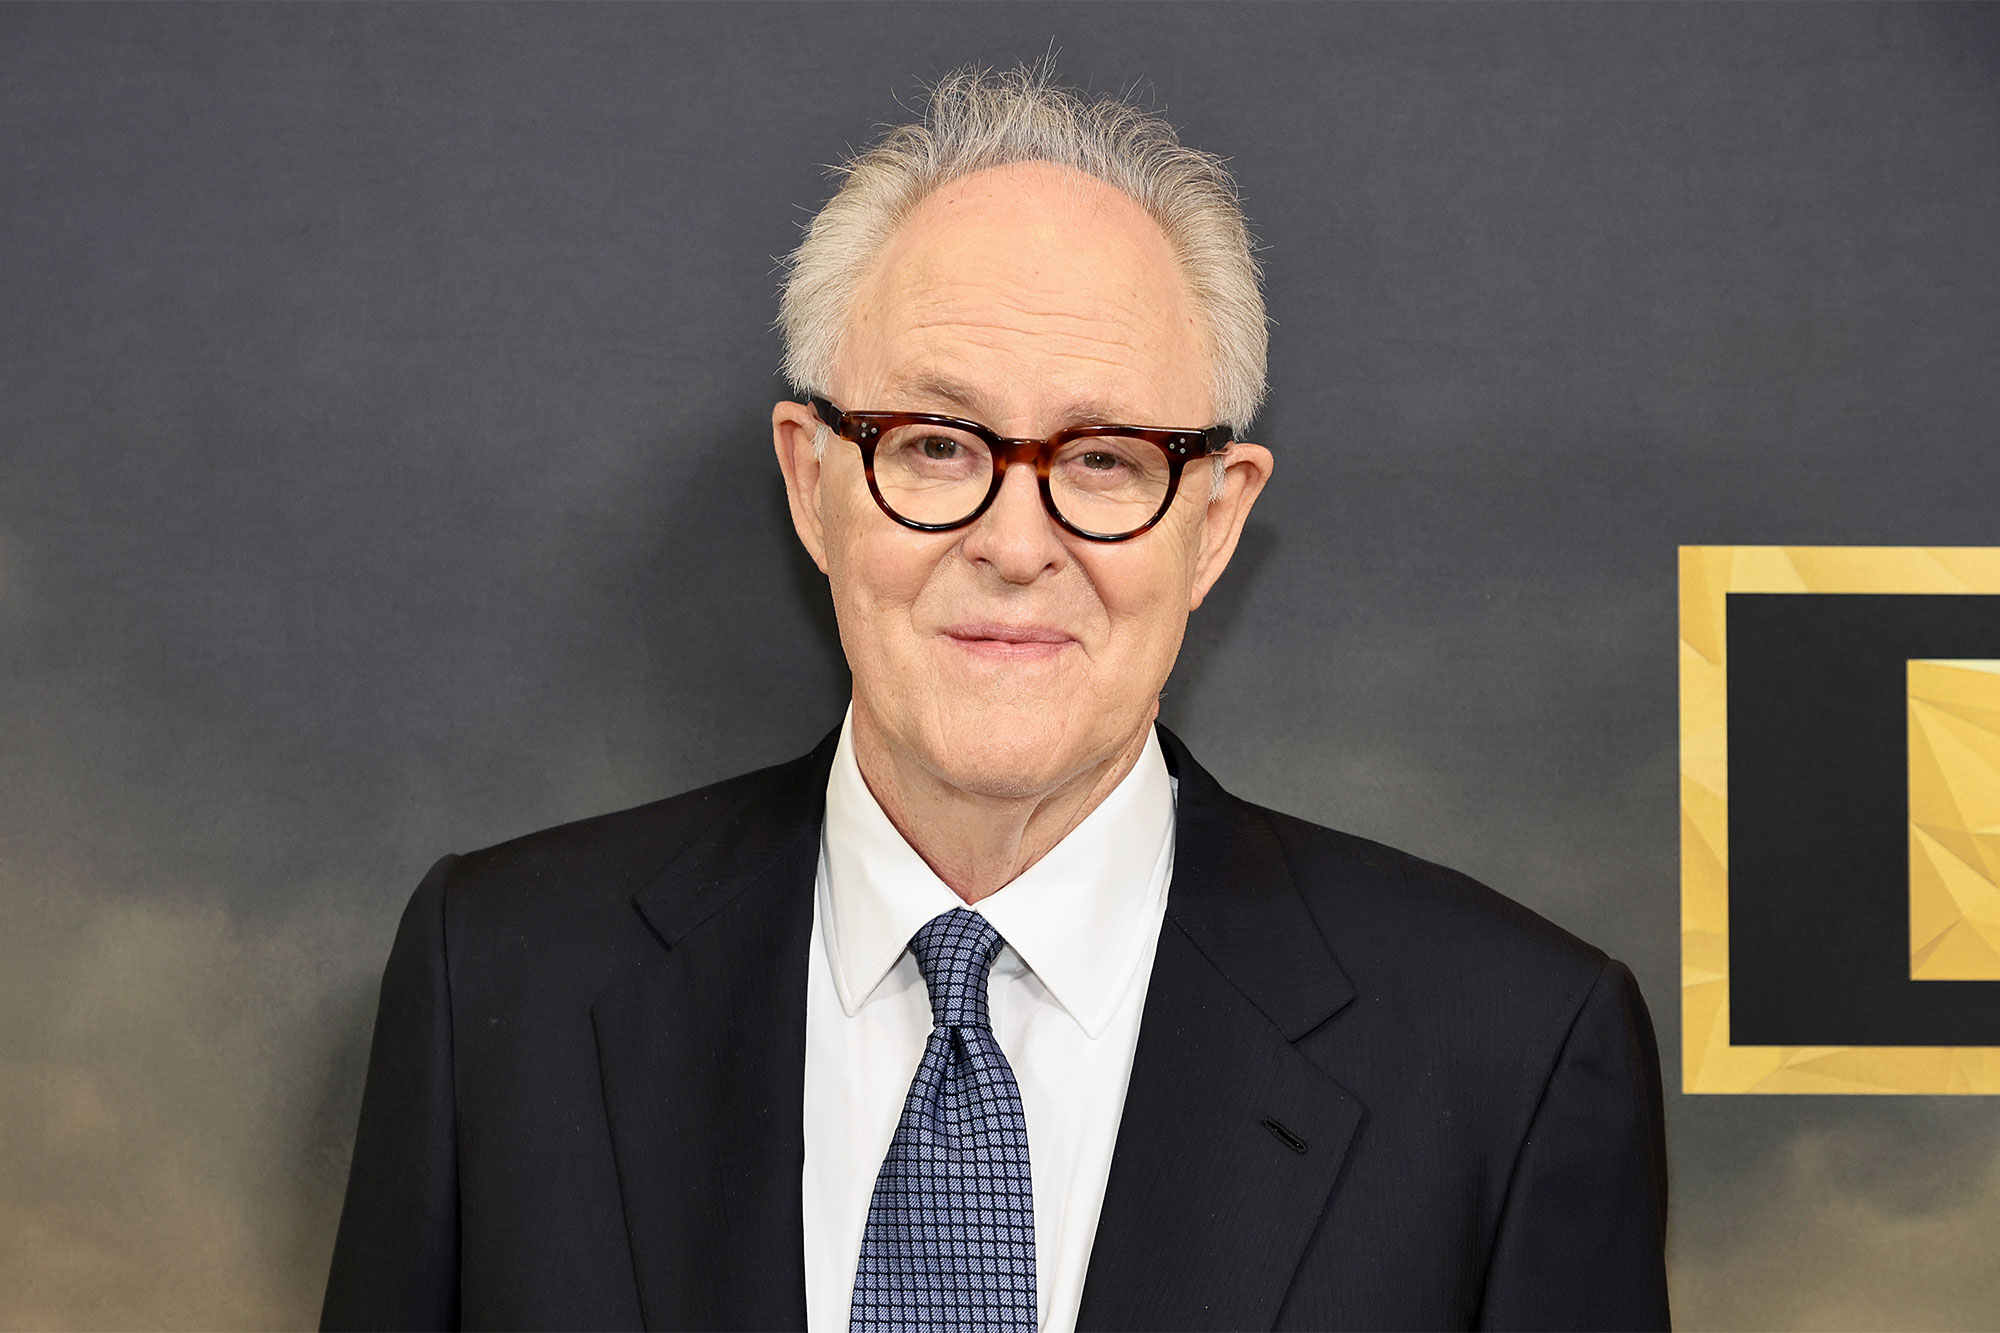 john lithgow on screen and stage